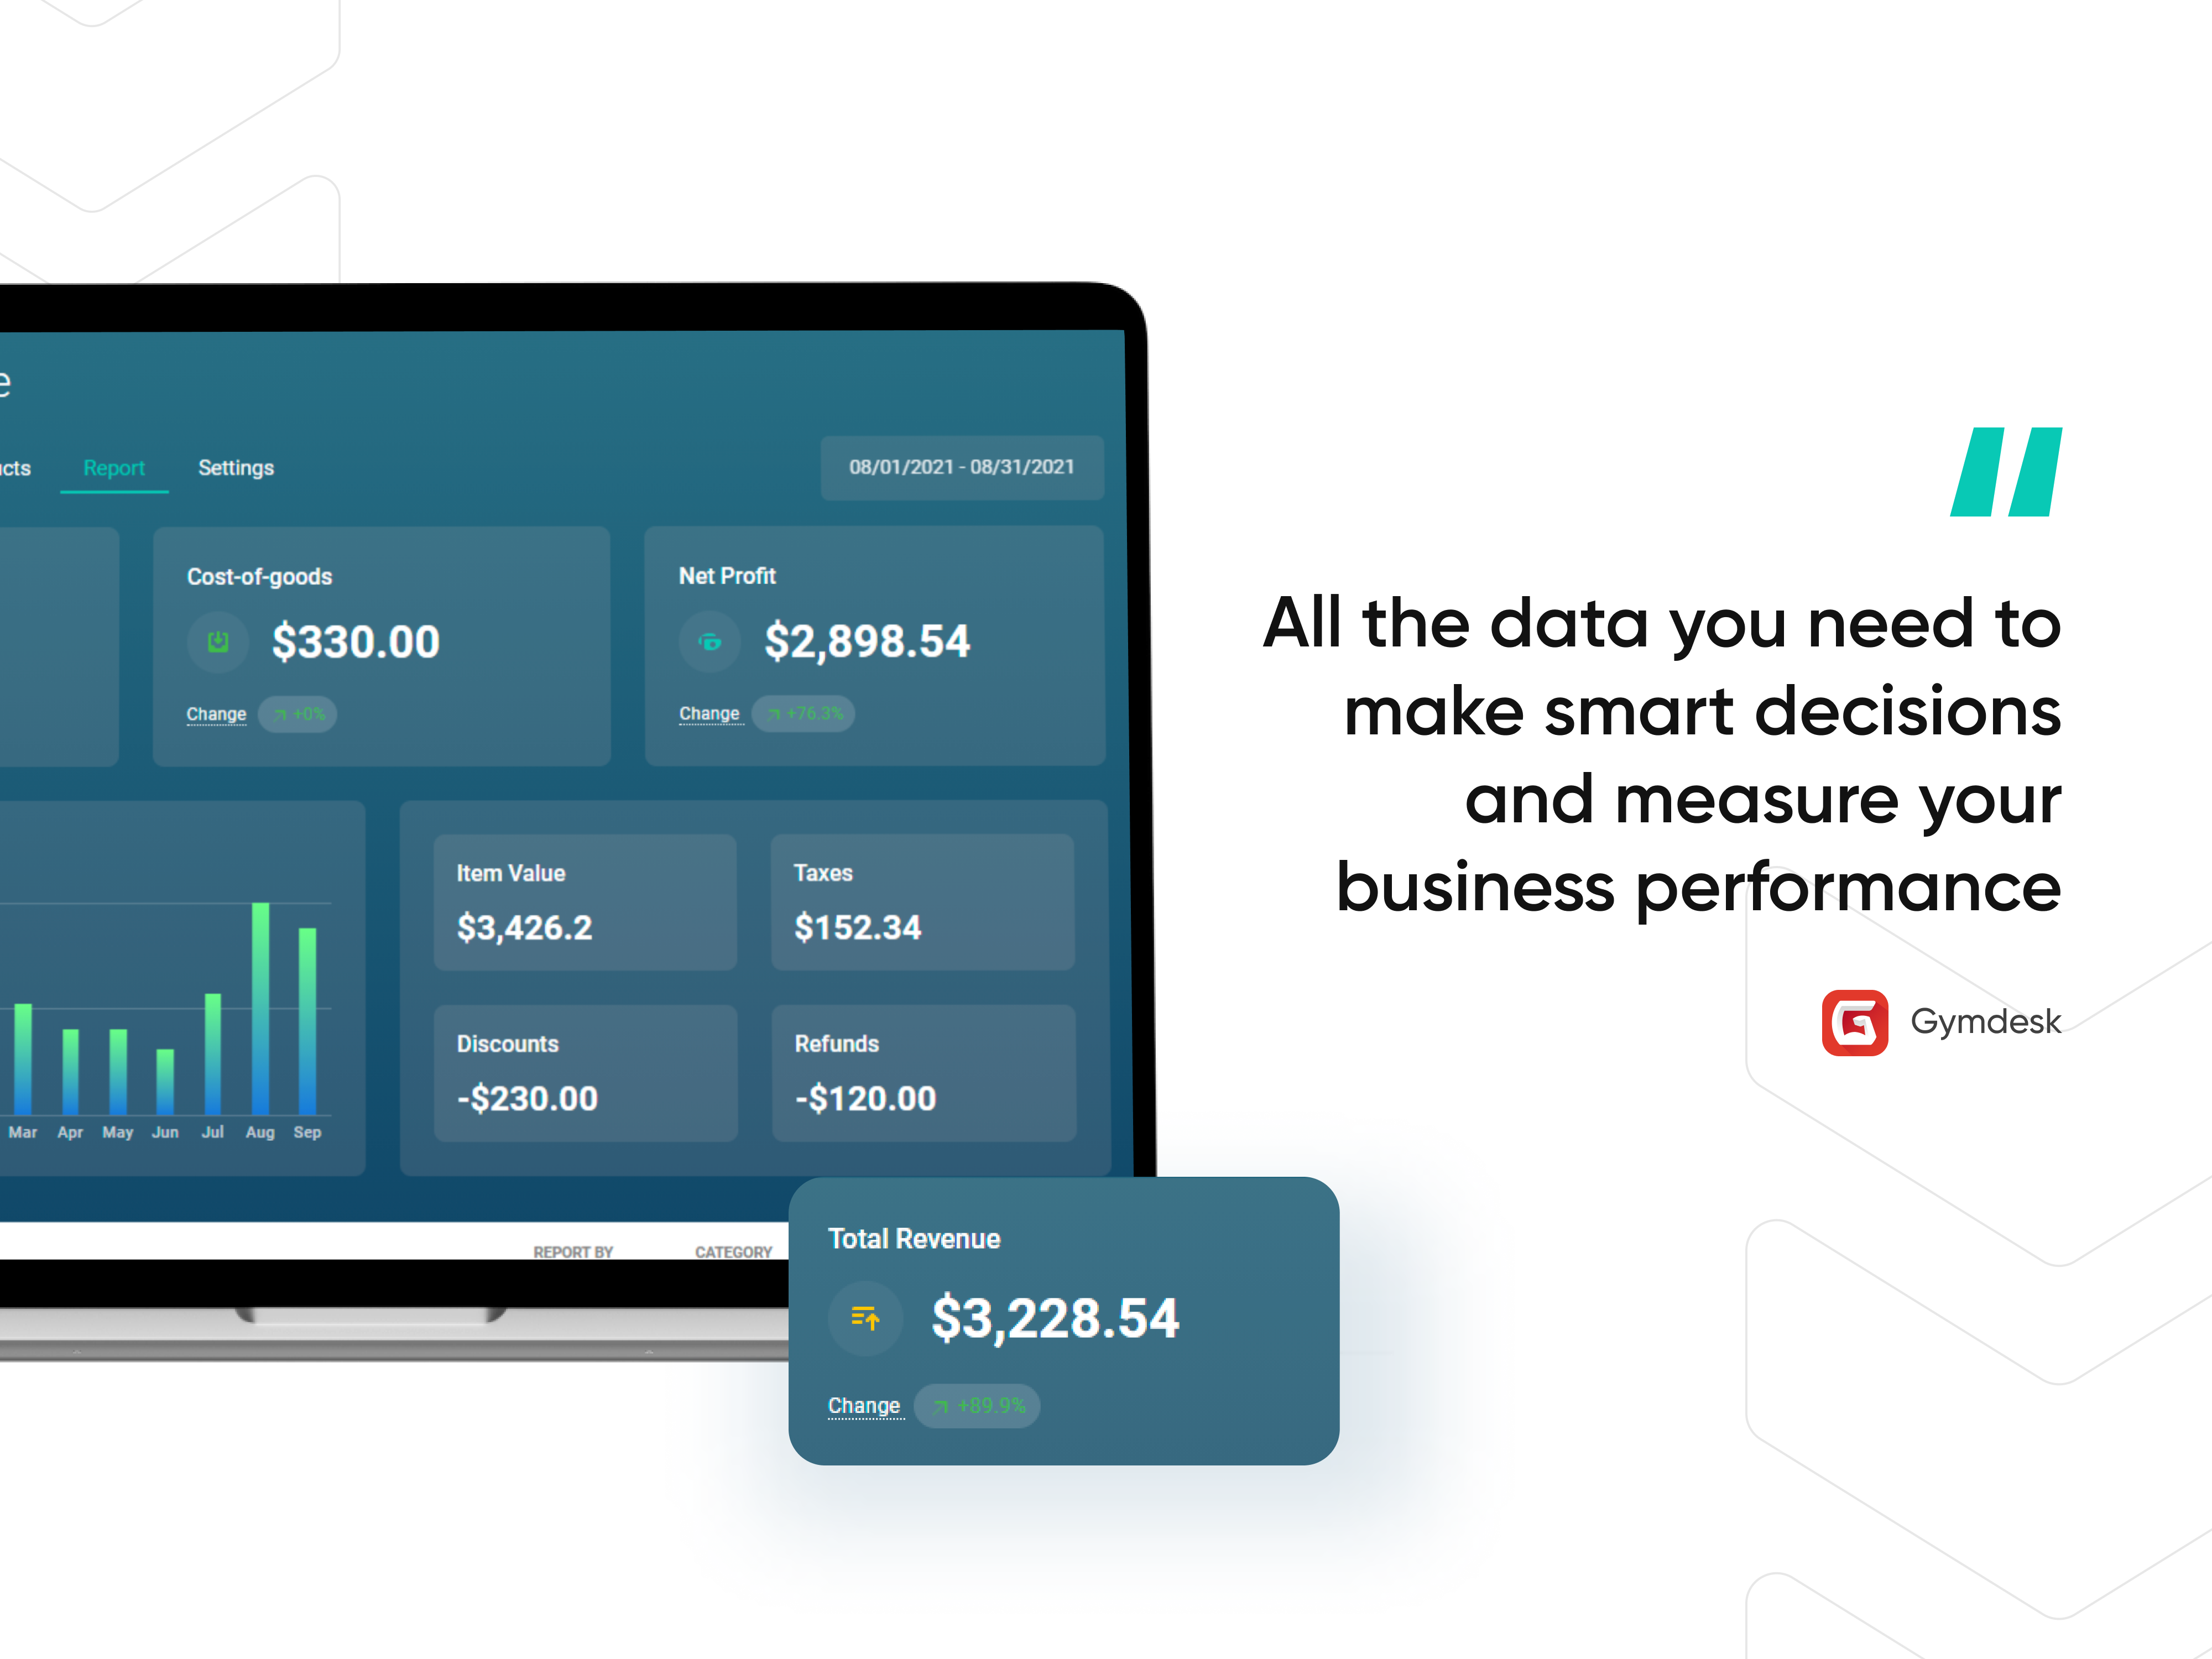 Gymdesk Software - Clear reporting helps you stay on top of how your business is performing